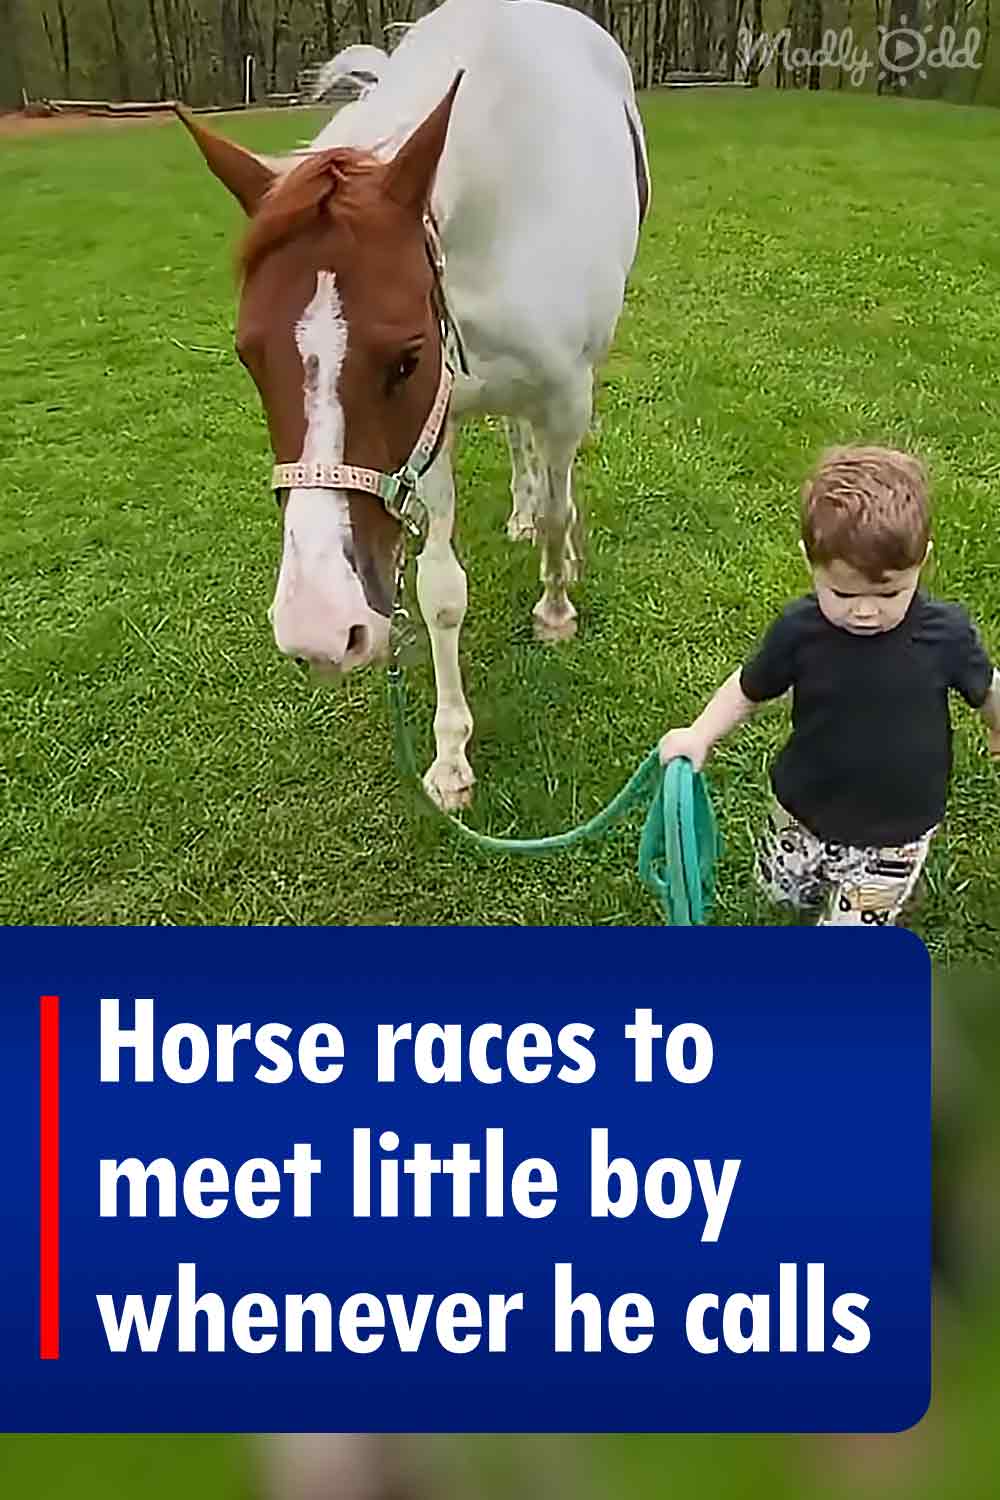 Horse races to meet little boy whenever he calls